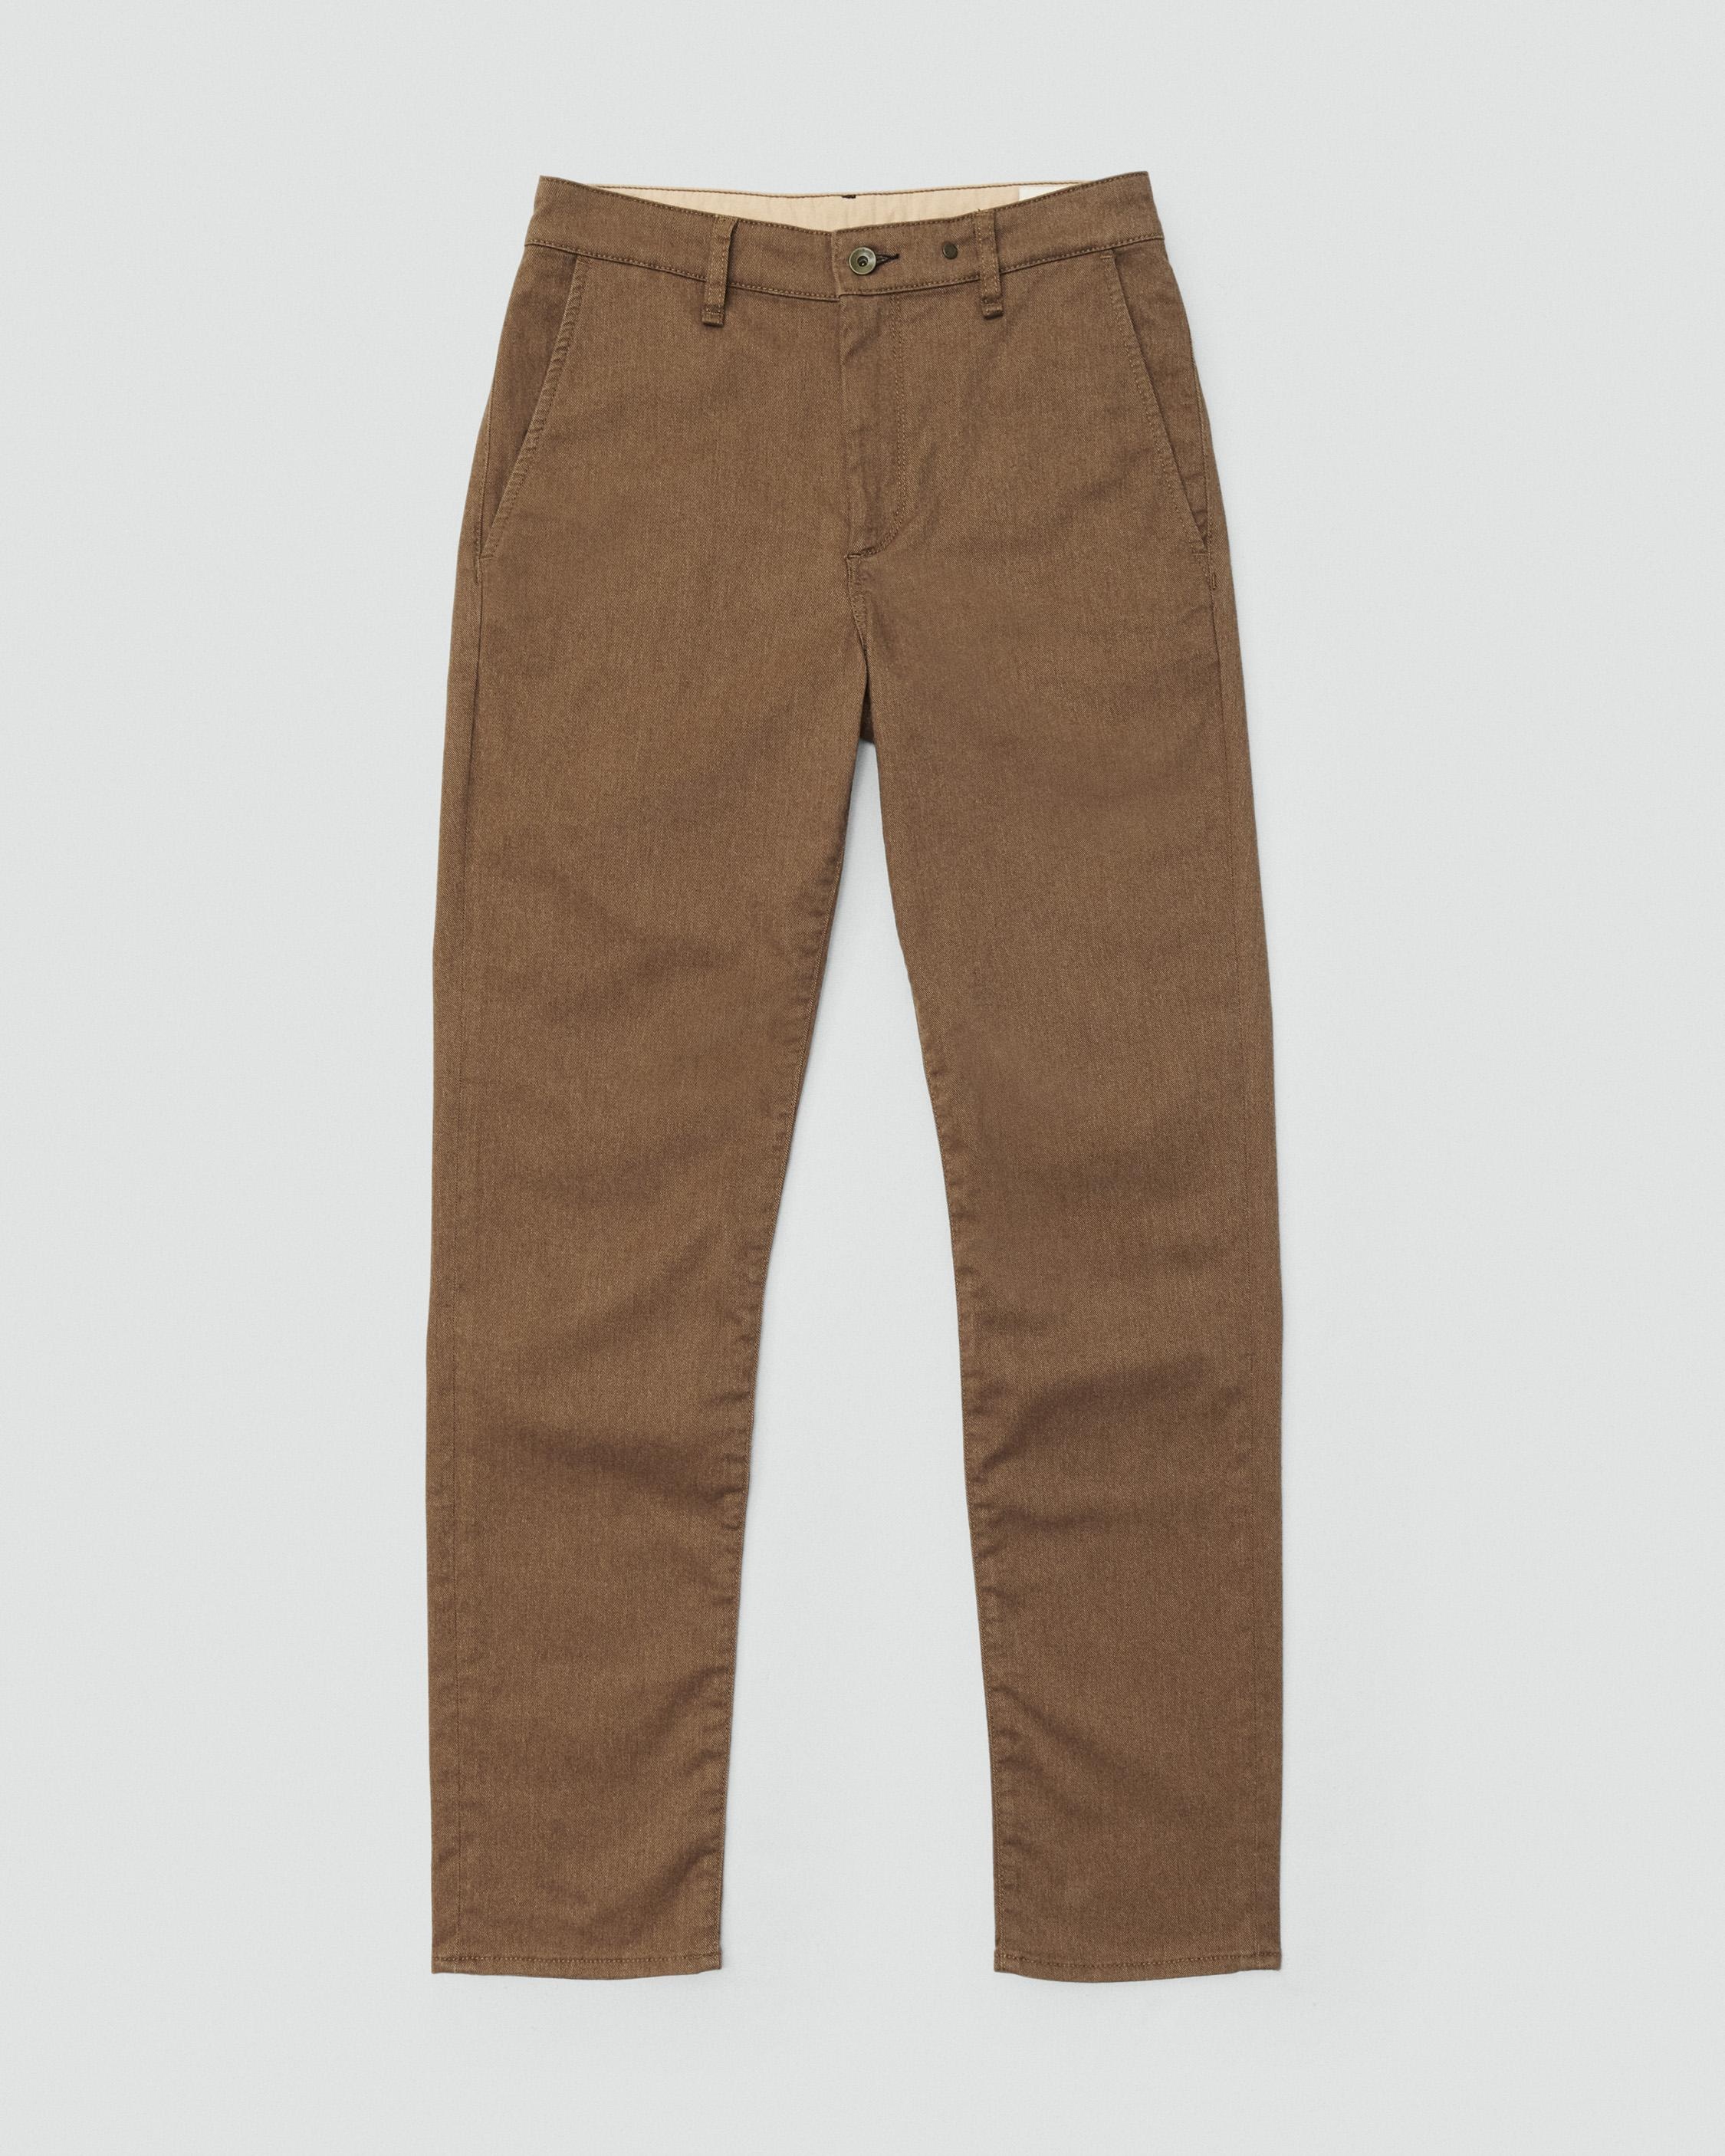 Fit 2 Brushed Twill Chino
Slim Fit - 1